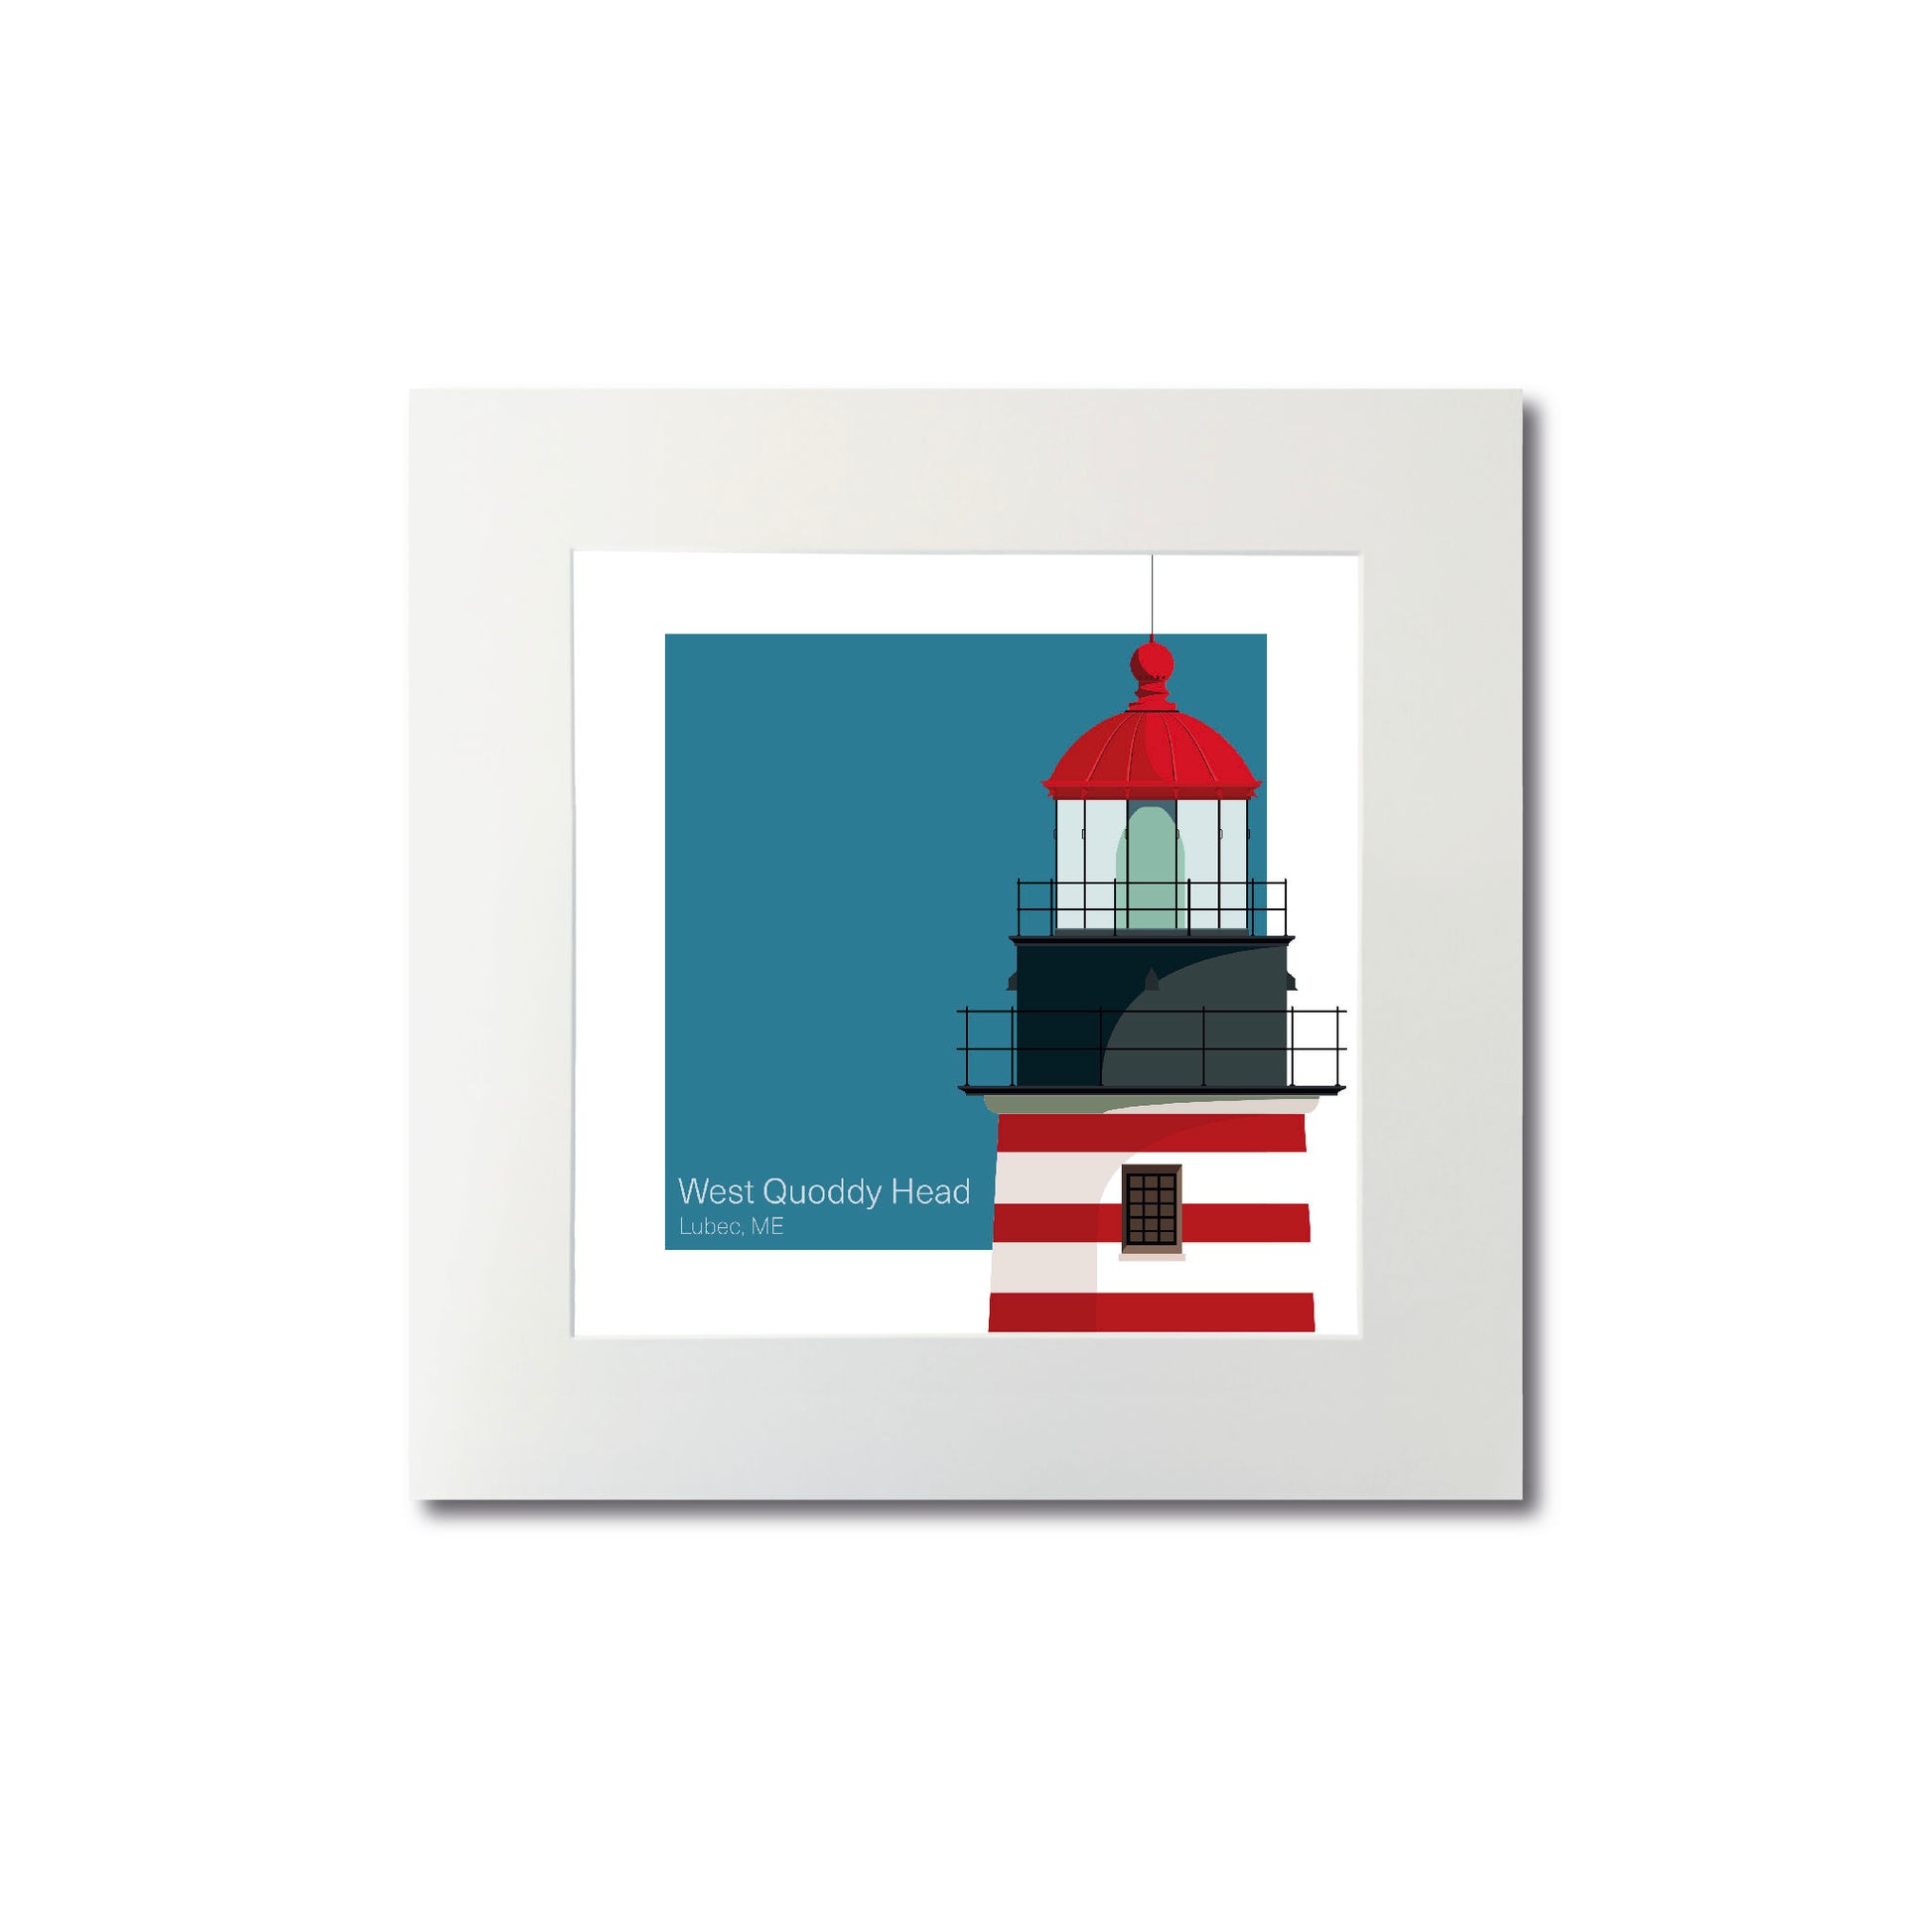 Illustration of the West Quoddy Head lighthouse, ME, USA. On a white background with aqua blue square as a backdrop., mounted and measuring 8"x8" (20x20cm).